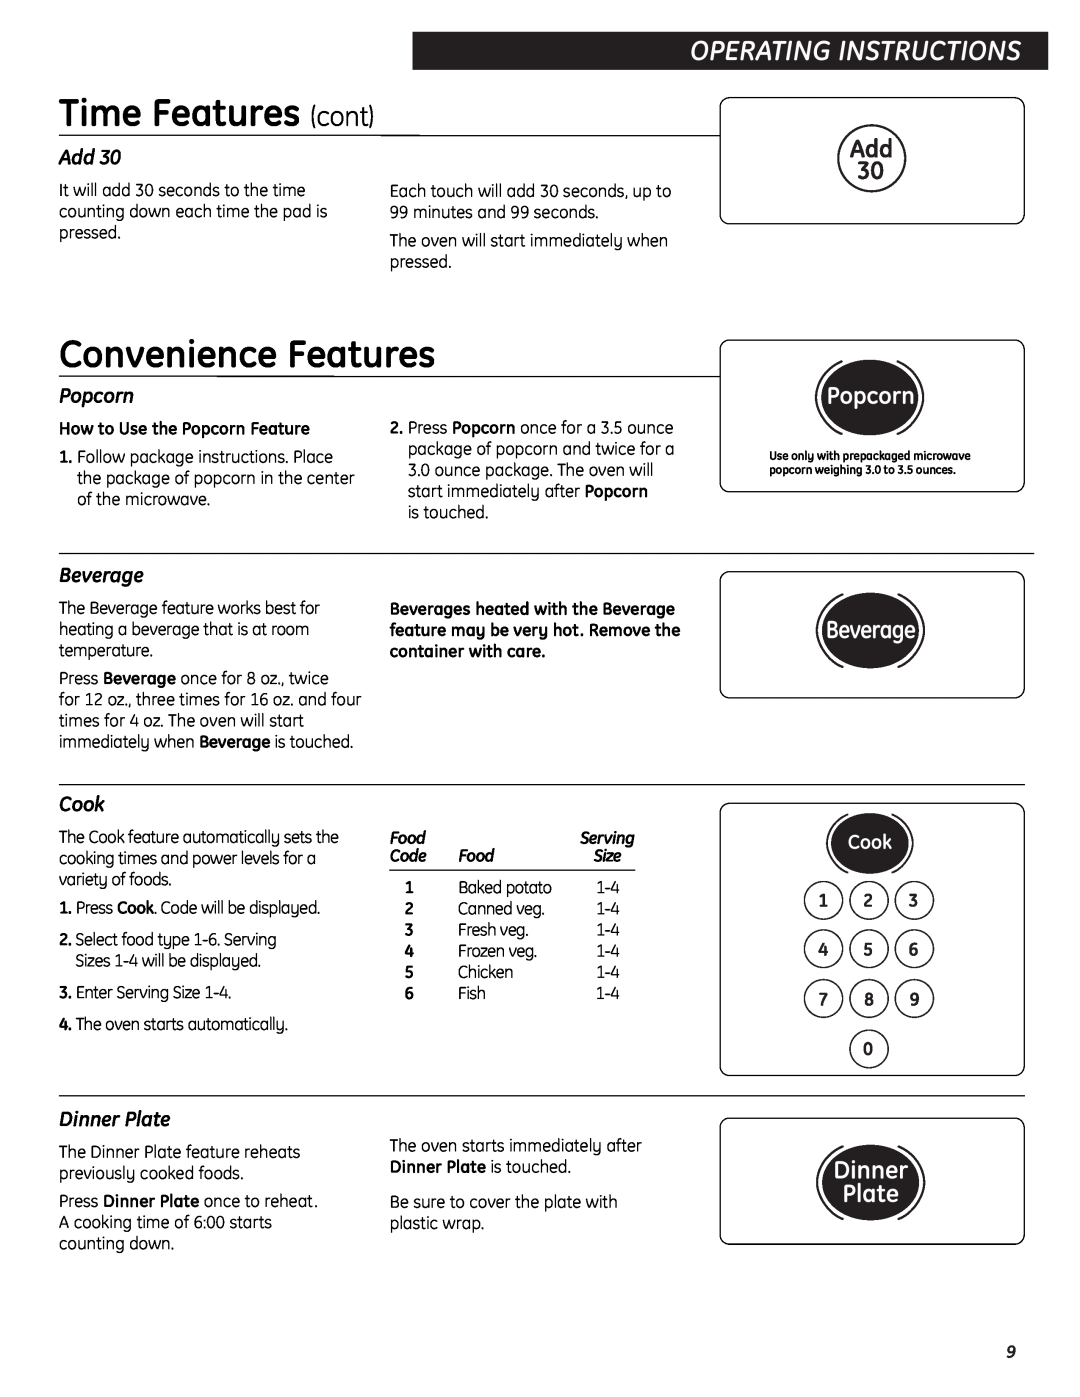 GE JES0734PMRR operating instructions Convenience Features, Popcorn, Beverage, Cook, Dinner Plate, Food, Time Features cont 